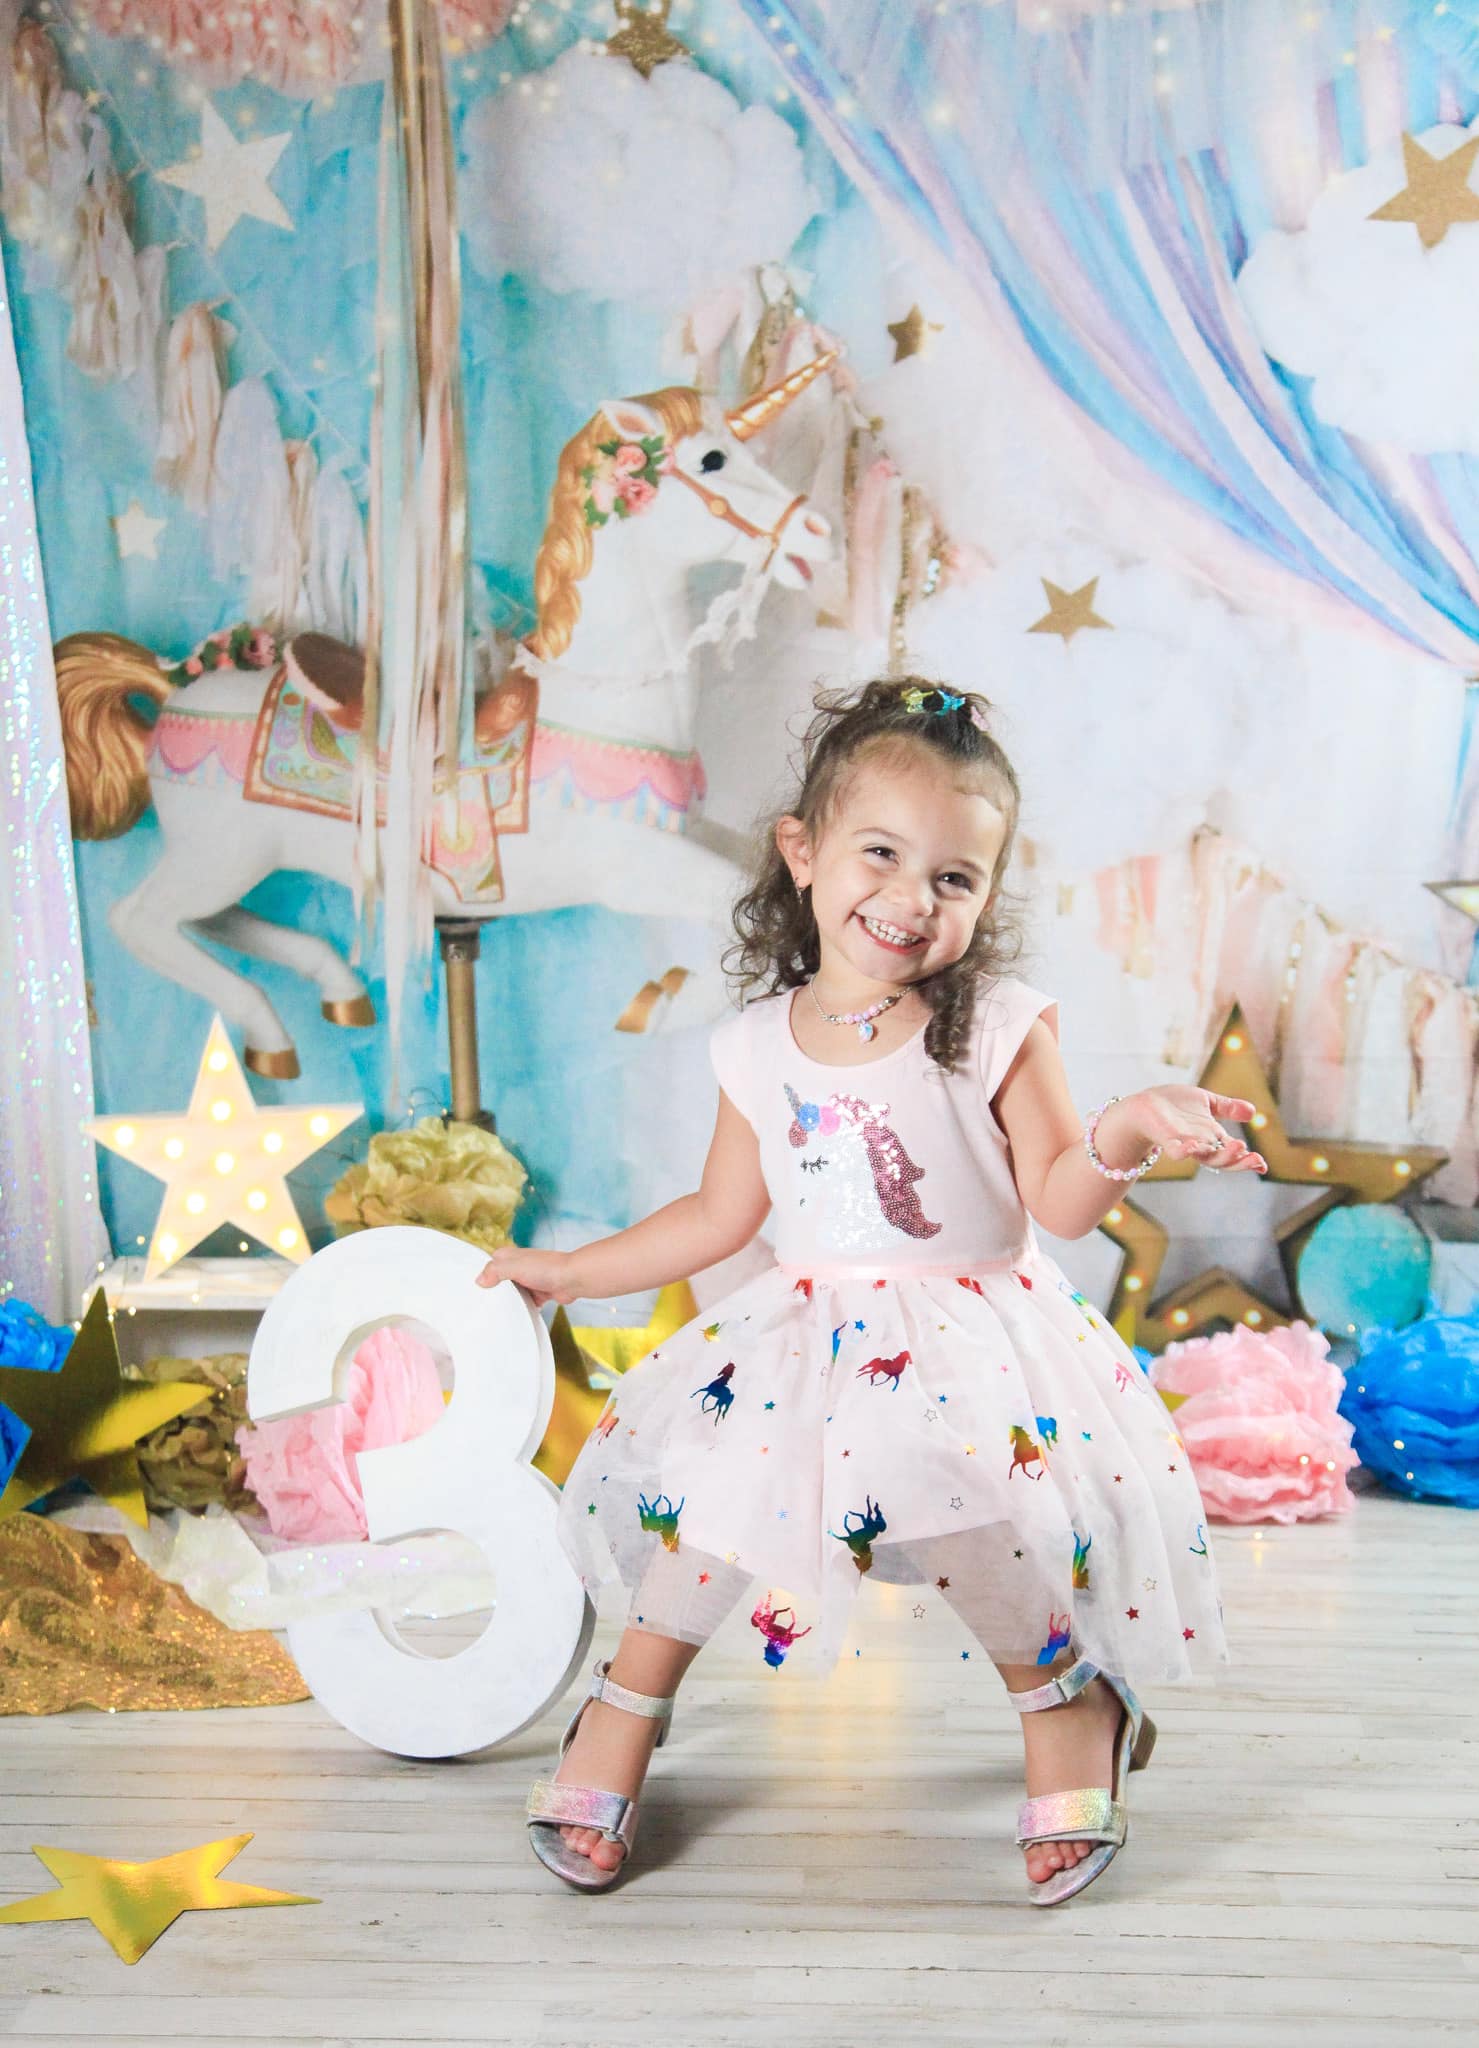 Kate 7x5ft Unicorn Carousel Backdrop Dreams Designed by Mandy Ringe Photography (only ship to Canada)